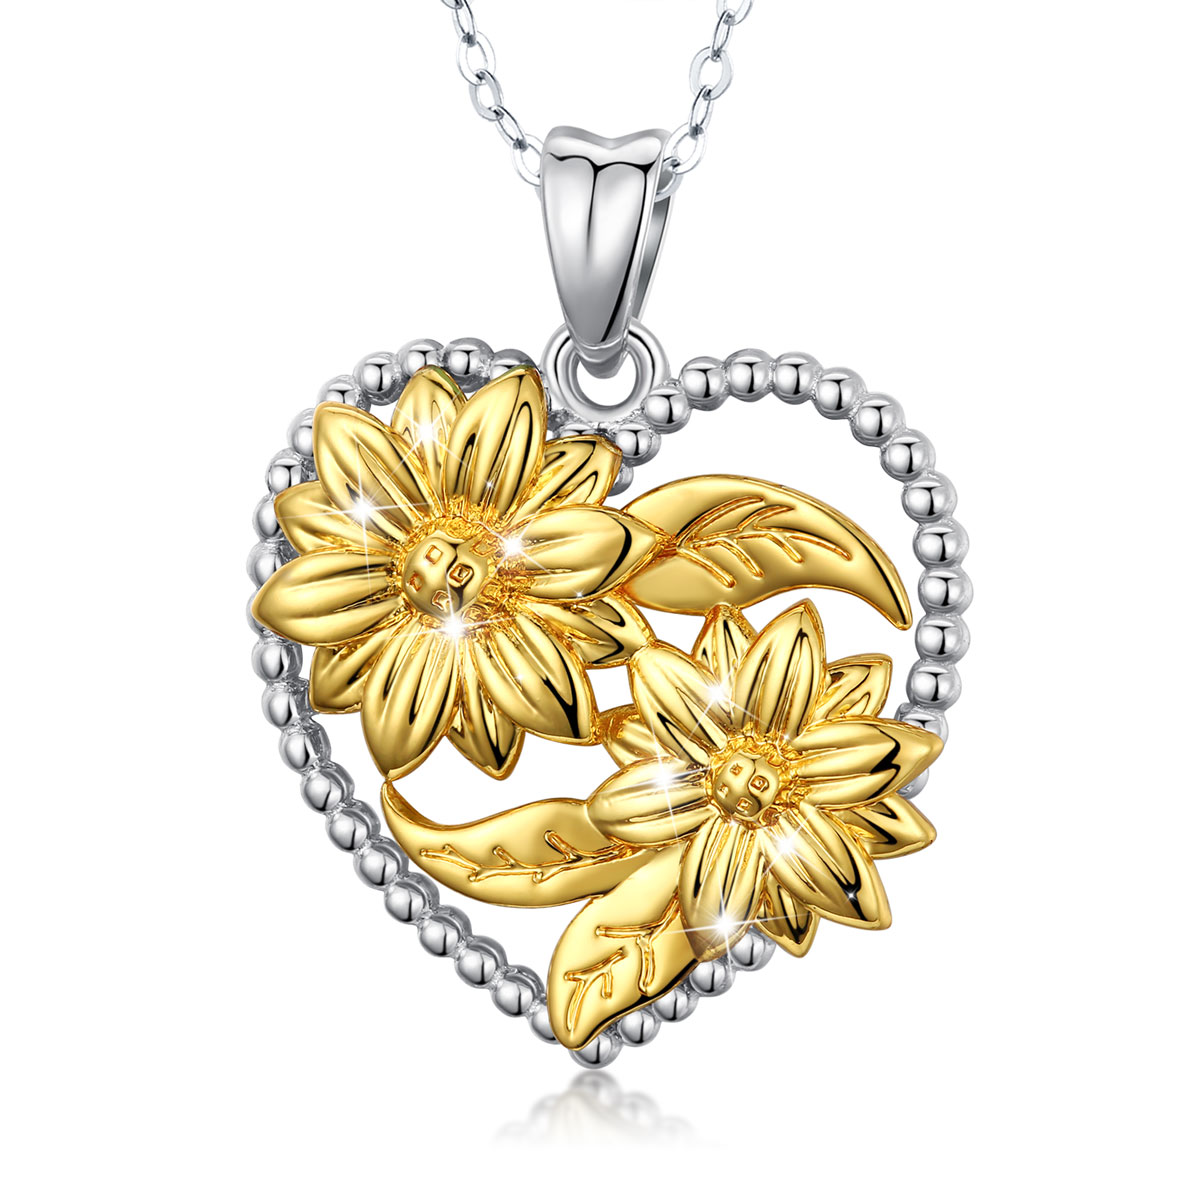 Sunflower Design Necklace Gold Plated 925 Sterling Silver Jewelry Heart Shape Pendant